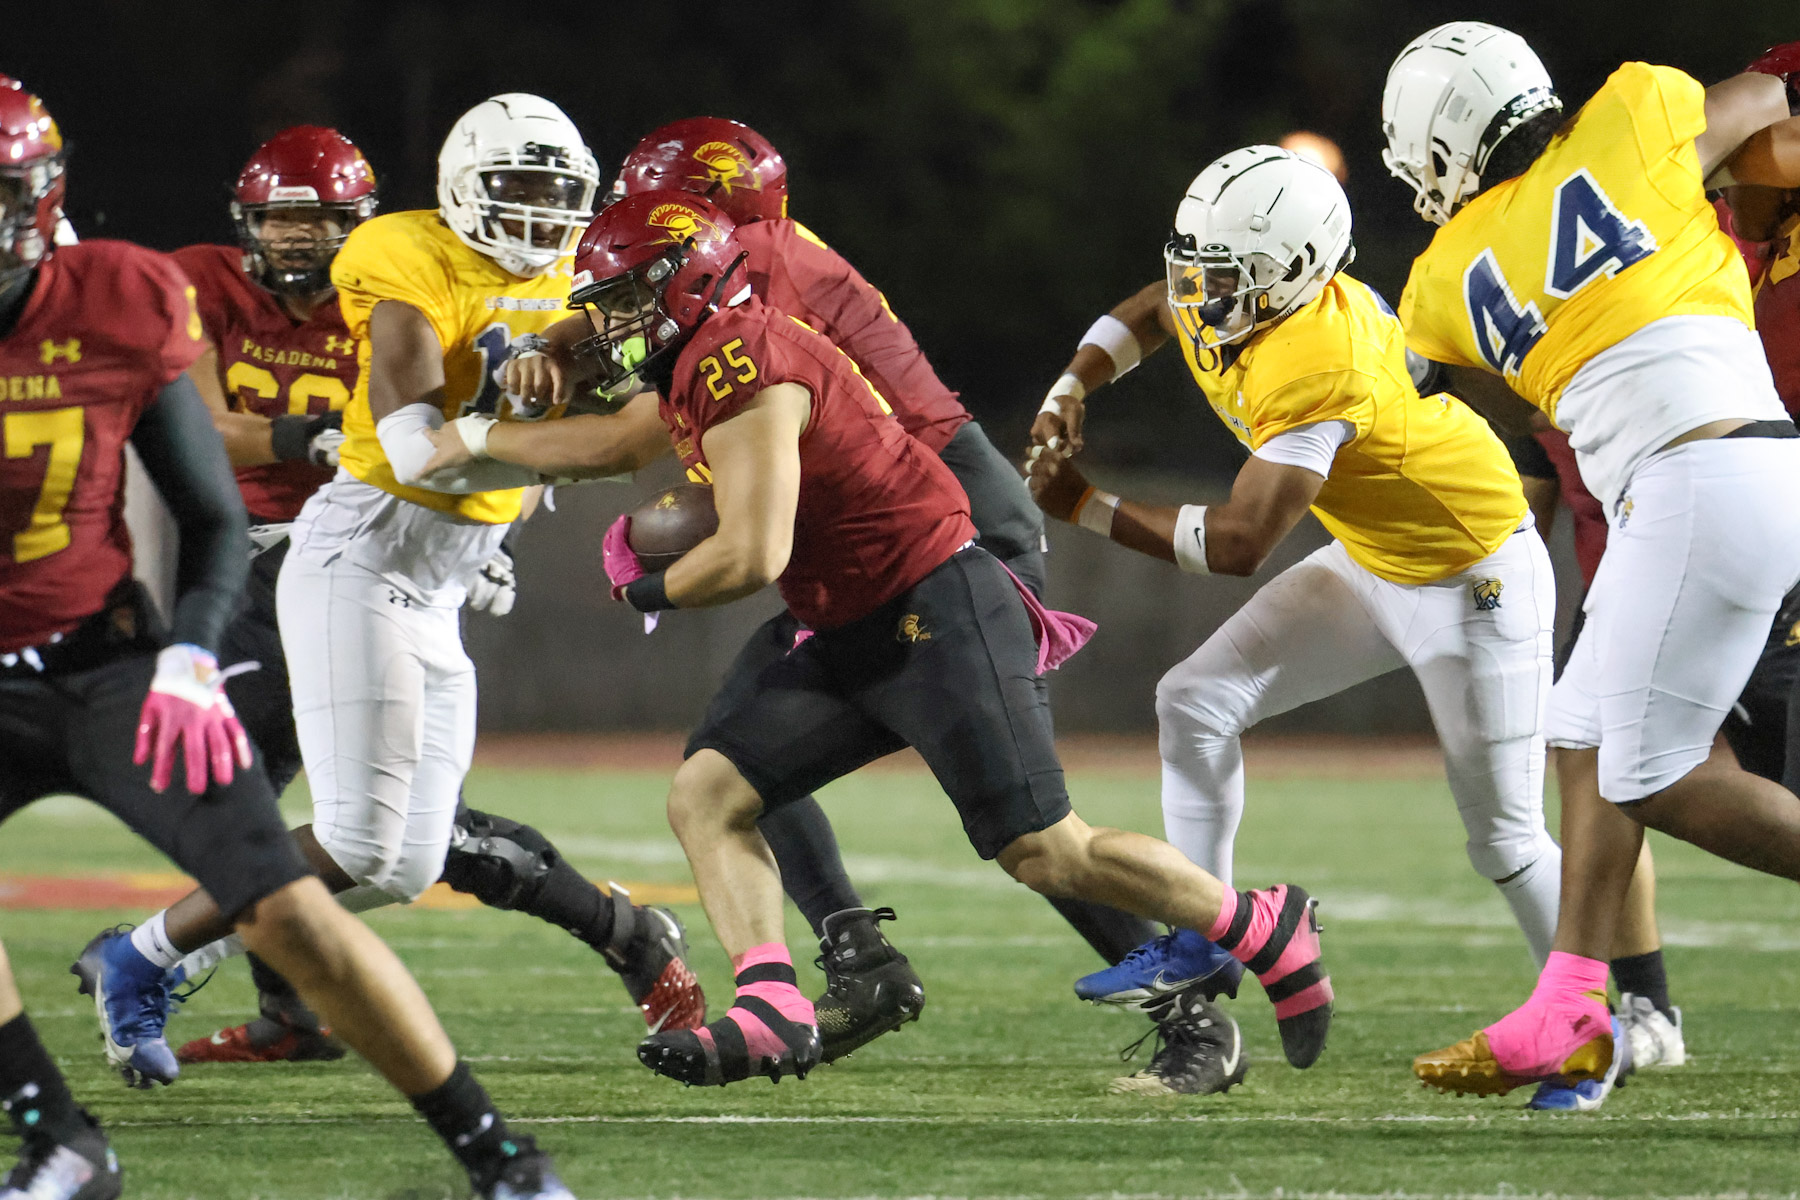 Mohammad Maali runs the ball during PCC's win over LA Southwest on Saturday night (photo by Richard Quinton).